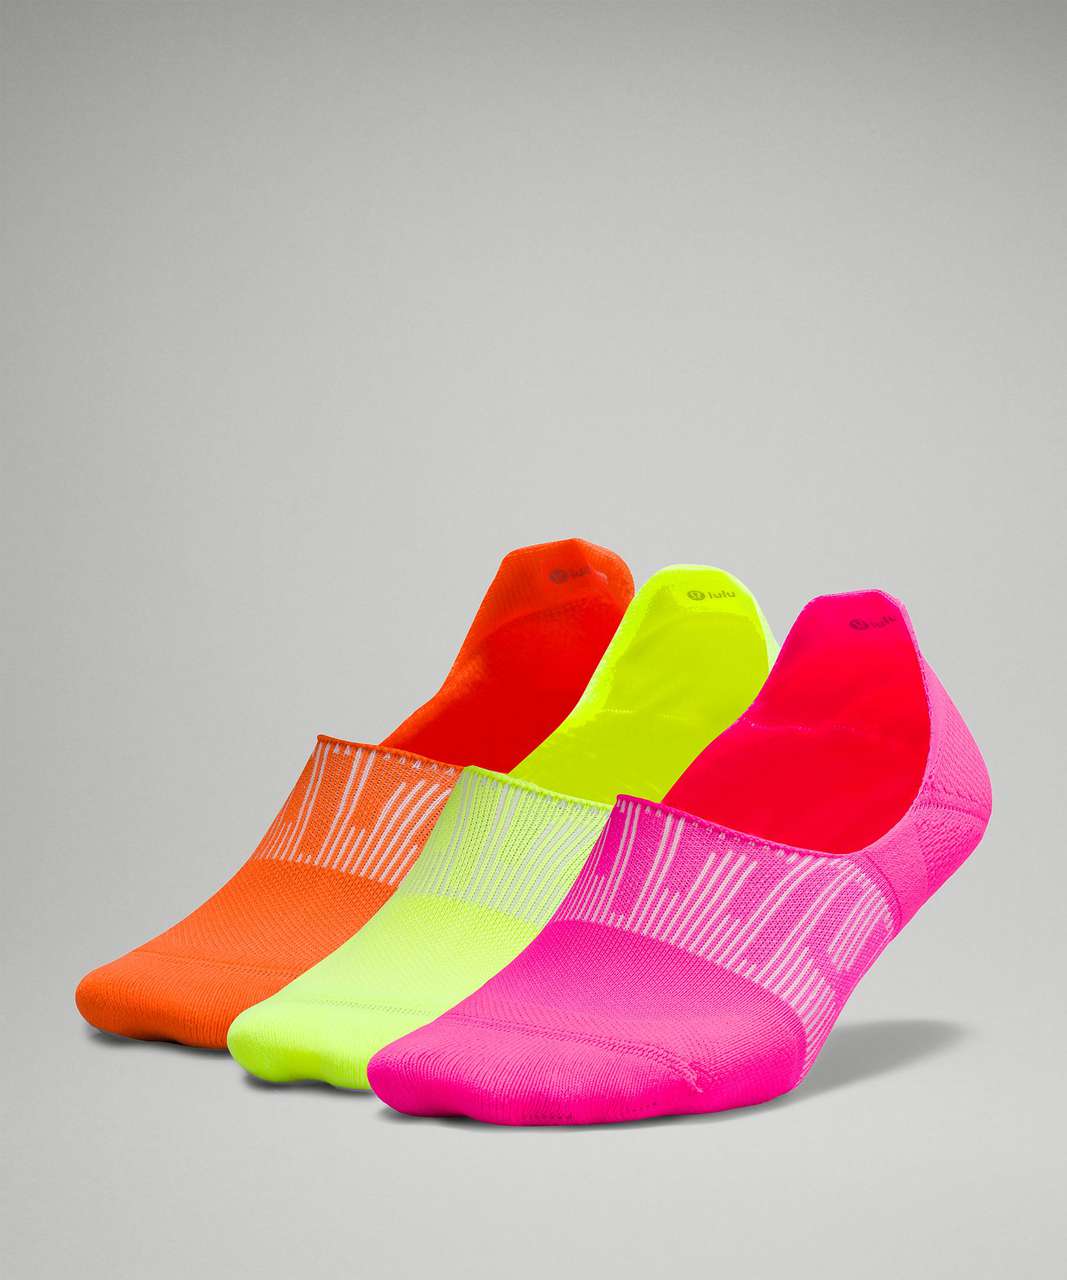 Lululemon Power Stride No-Show Sock with Active Grip 3 Pack - Highlight Pink / Highlight Yellow / Blaze Orange